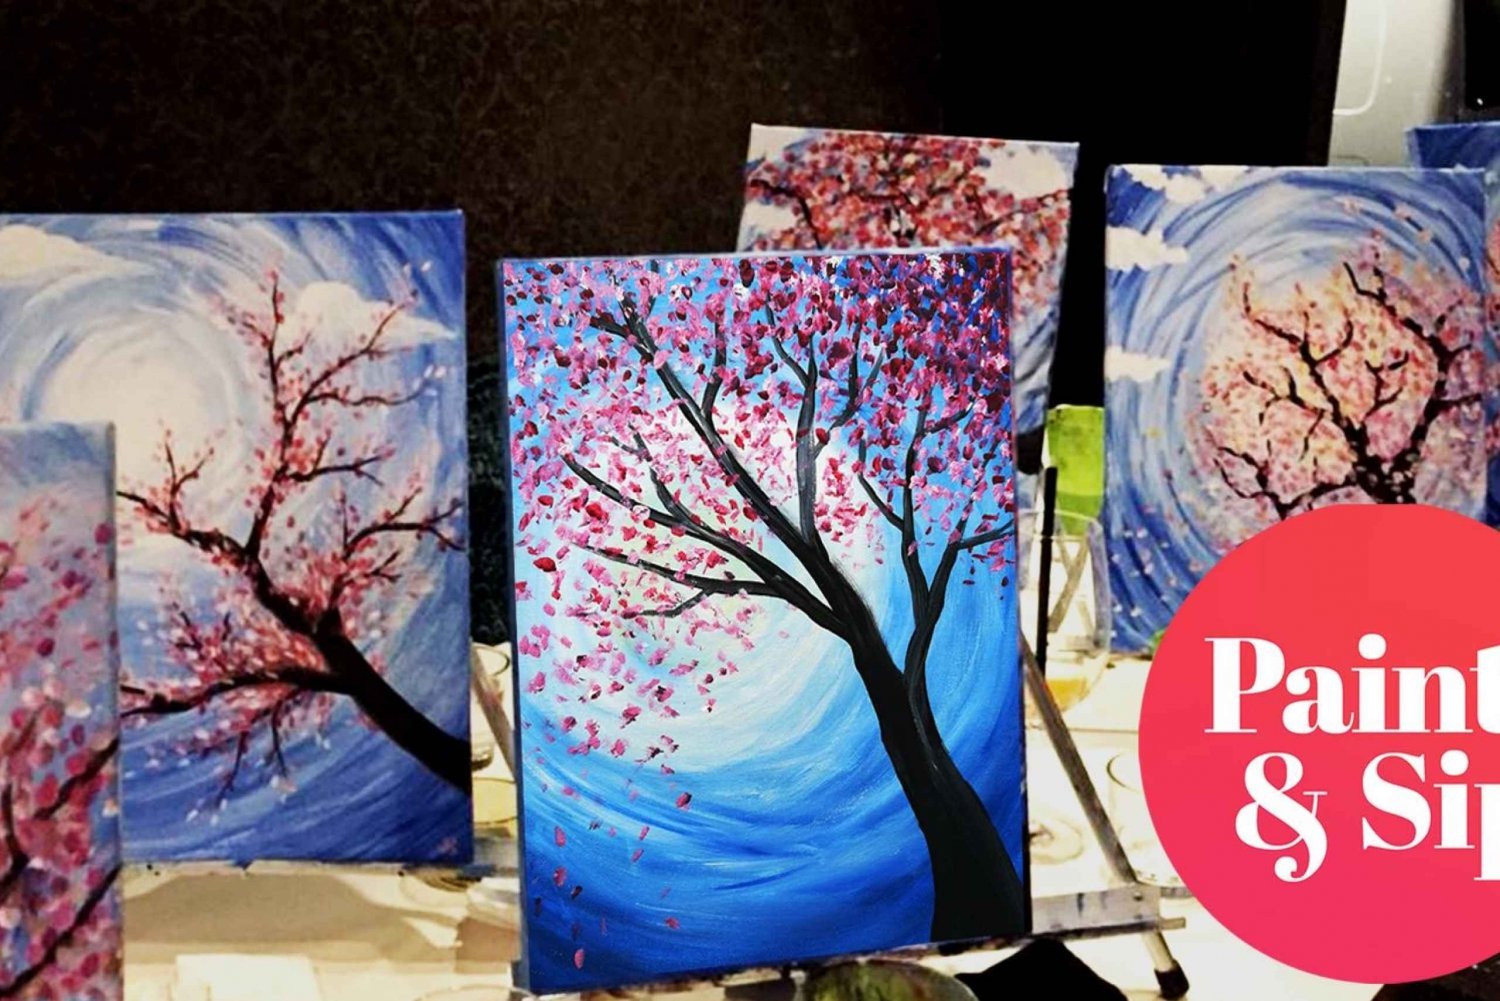 Paint & Sip: Paint and Wine Workshop with Welcome Drink